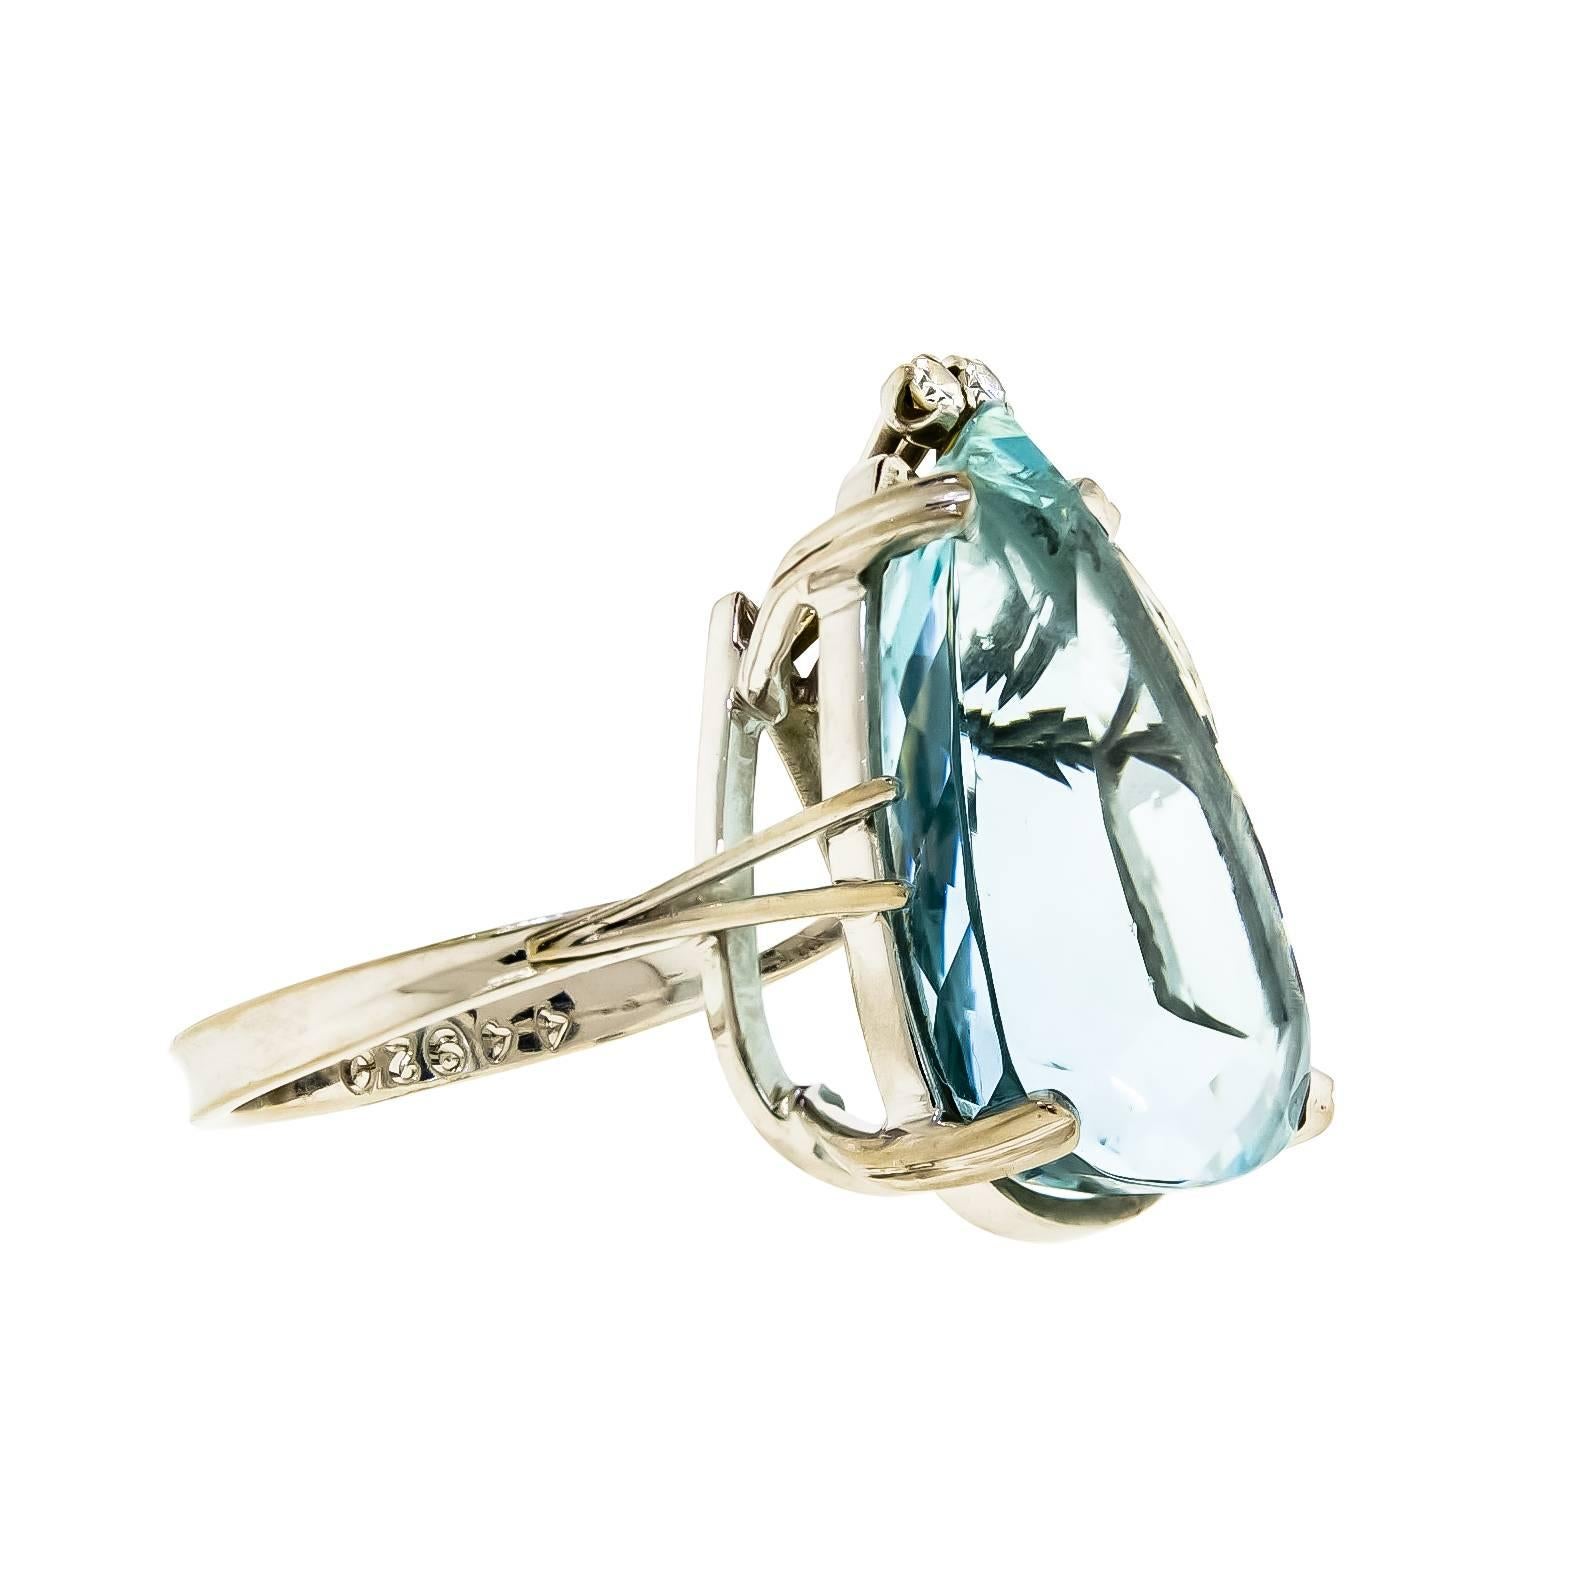 This large yet elegant mid-century aquamarine and the diamond cocktail ring is sure to draw attention. The beautiful crystal blue hue that radiates from the impressive pear-shaped aquamarine pair perfectly with the sublte glow of the 18 karat white